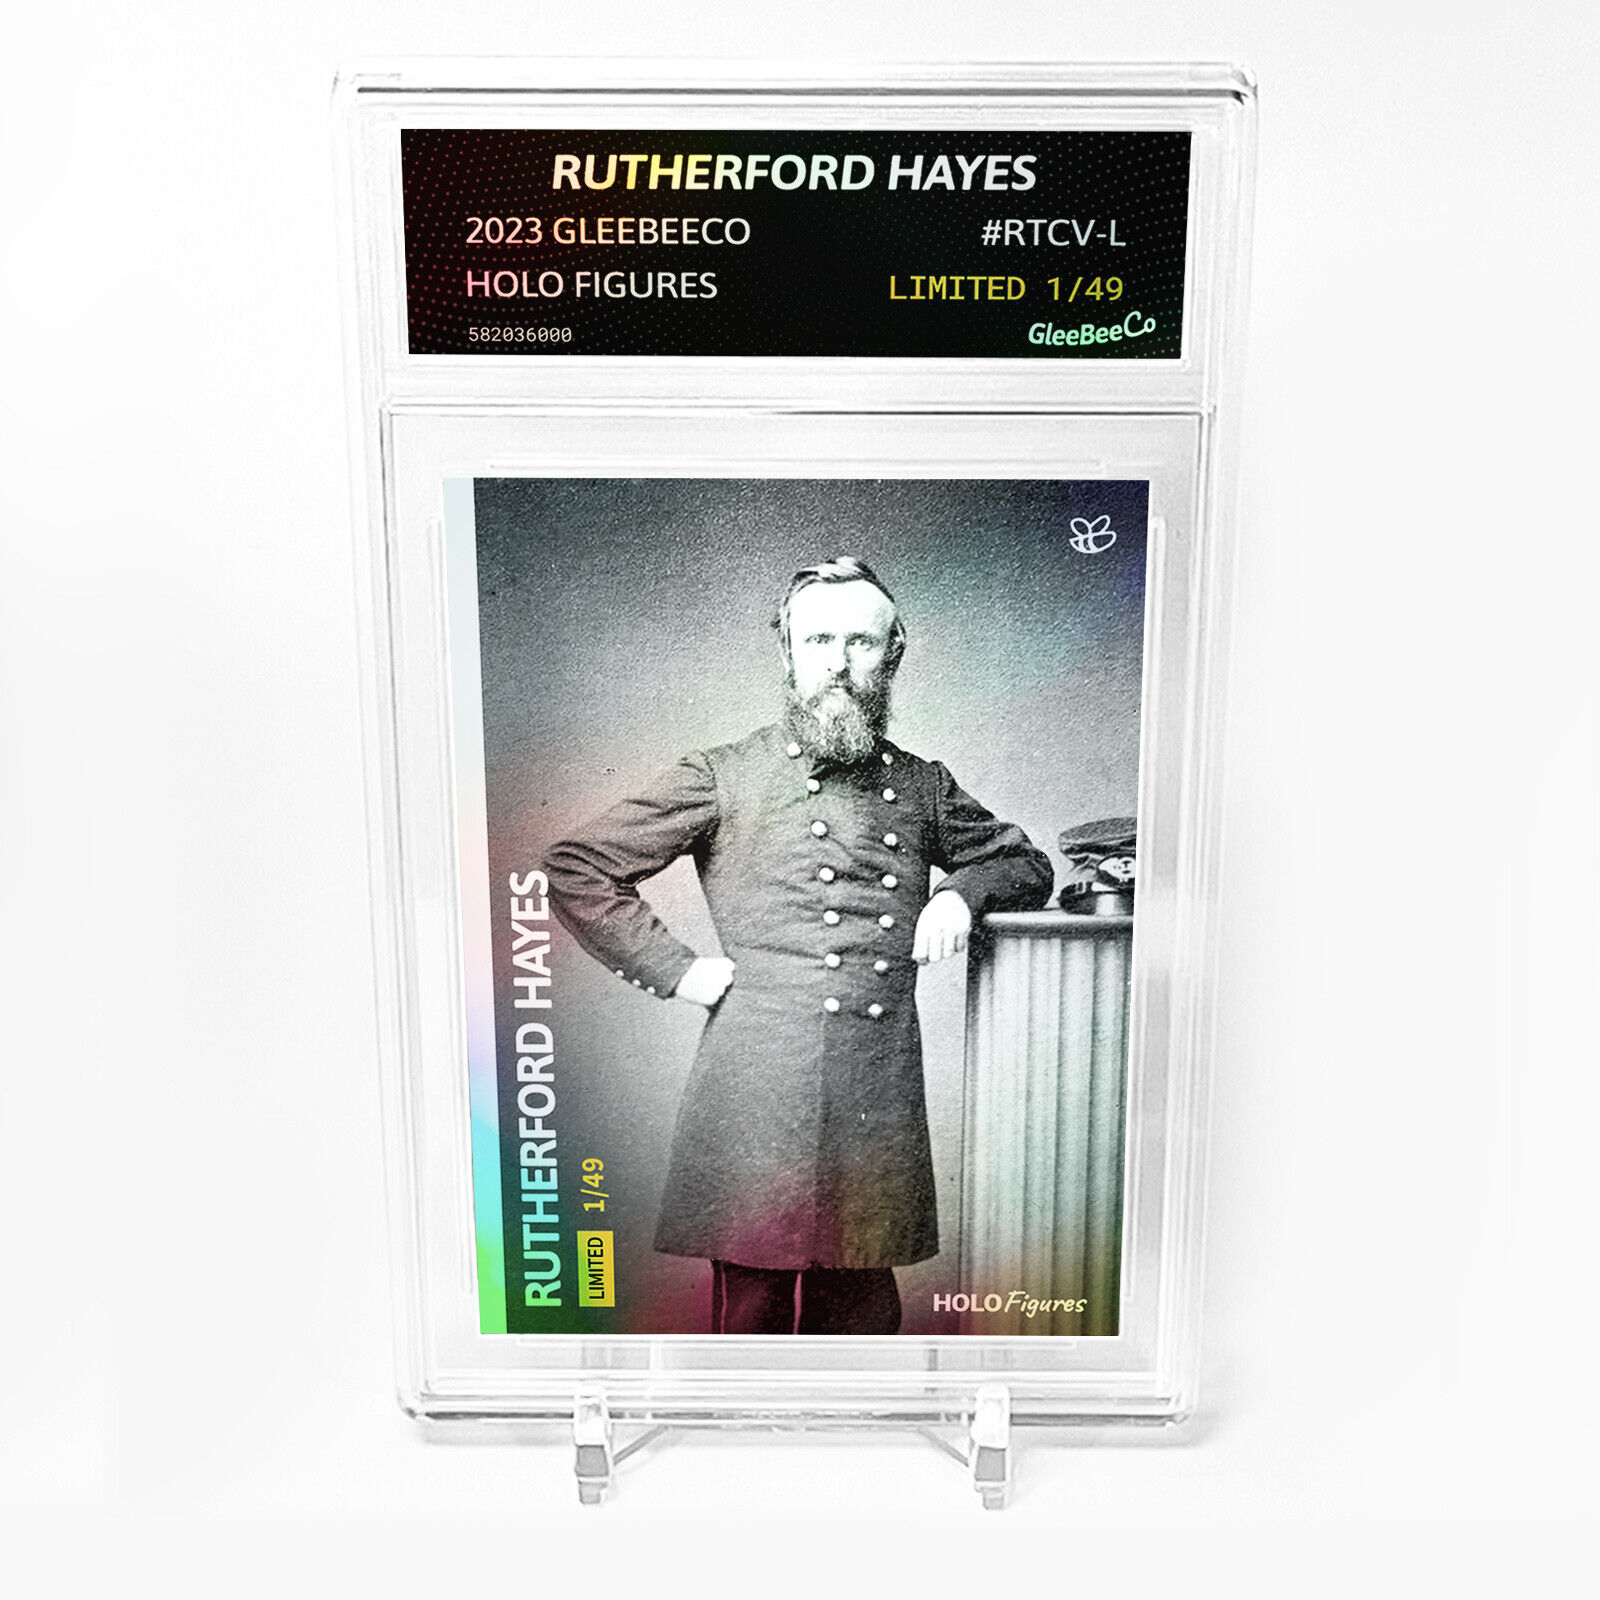 RUTHERFORD HAYES Civil War 2023 GleeBeeCo Card Holographic #RTCV-L /49